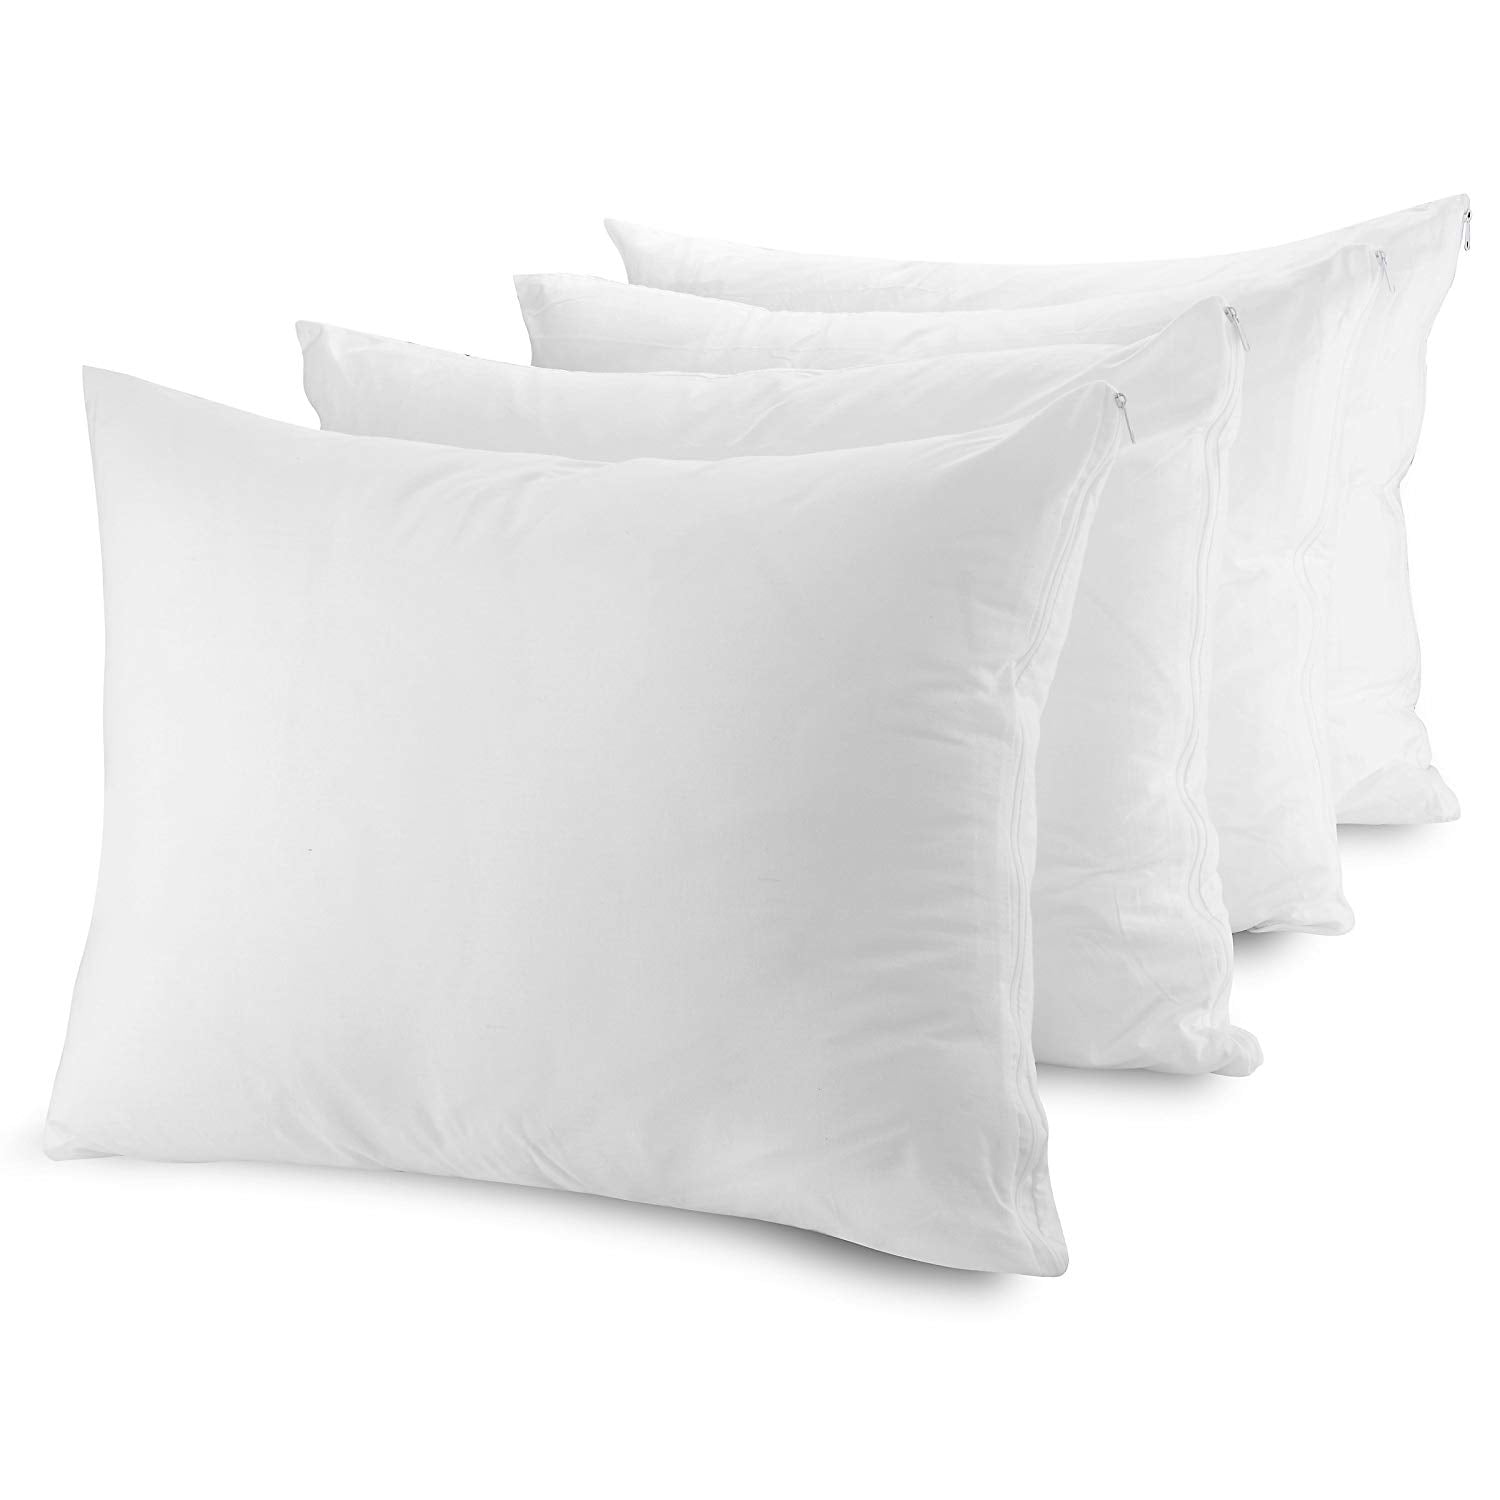 12 new white king size zippered pillow protectors 20x36 in cotton 